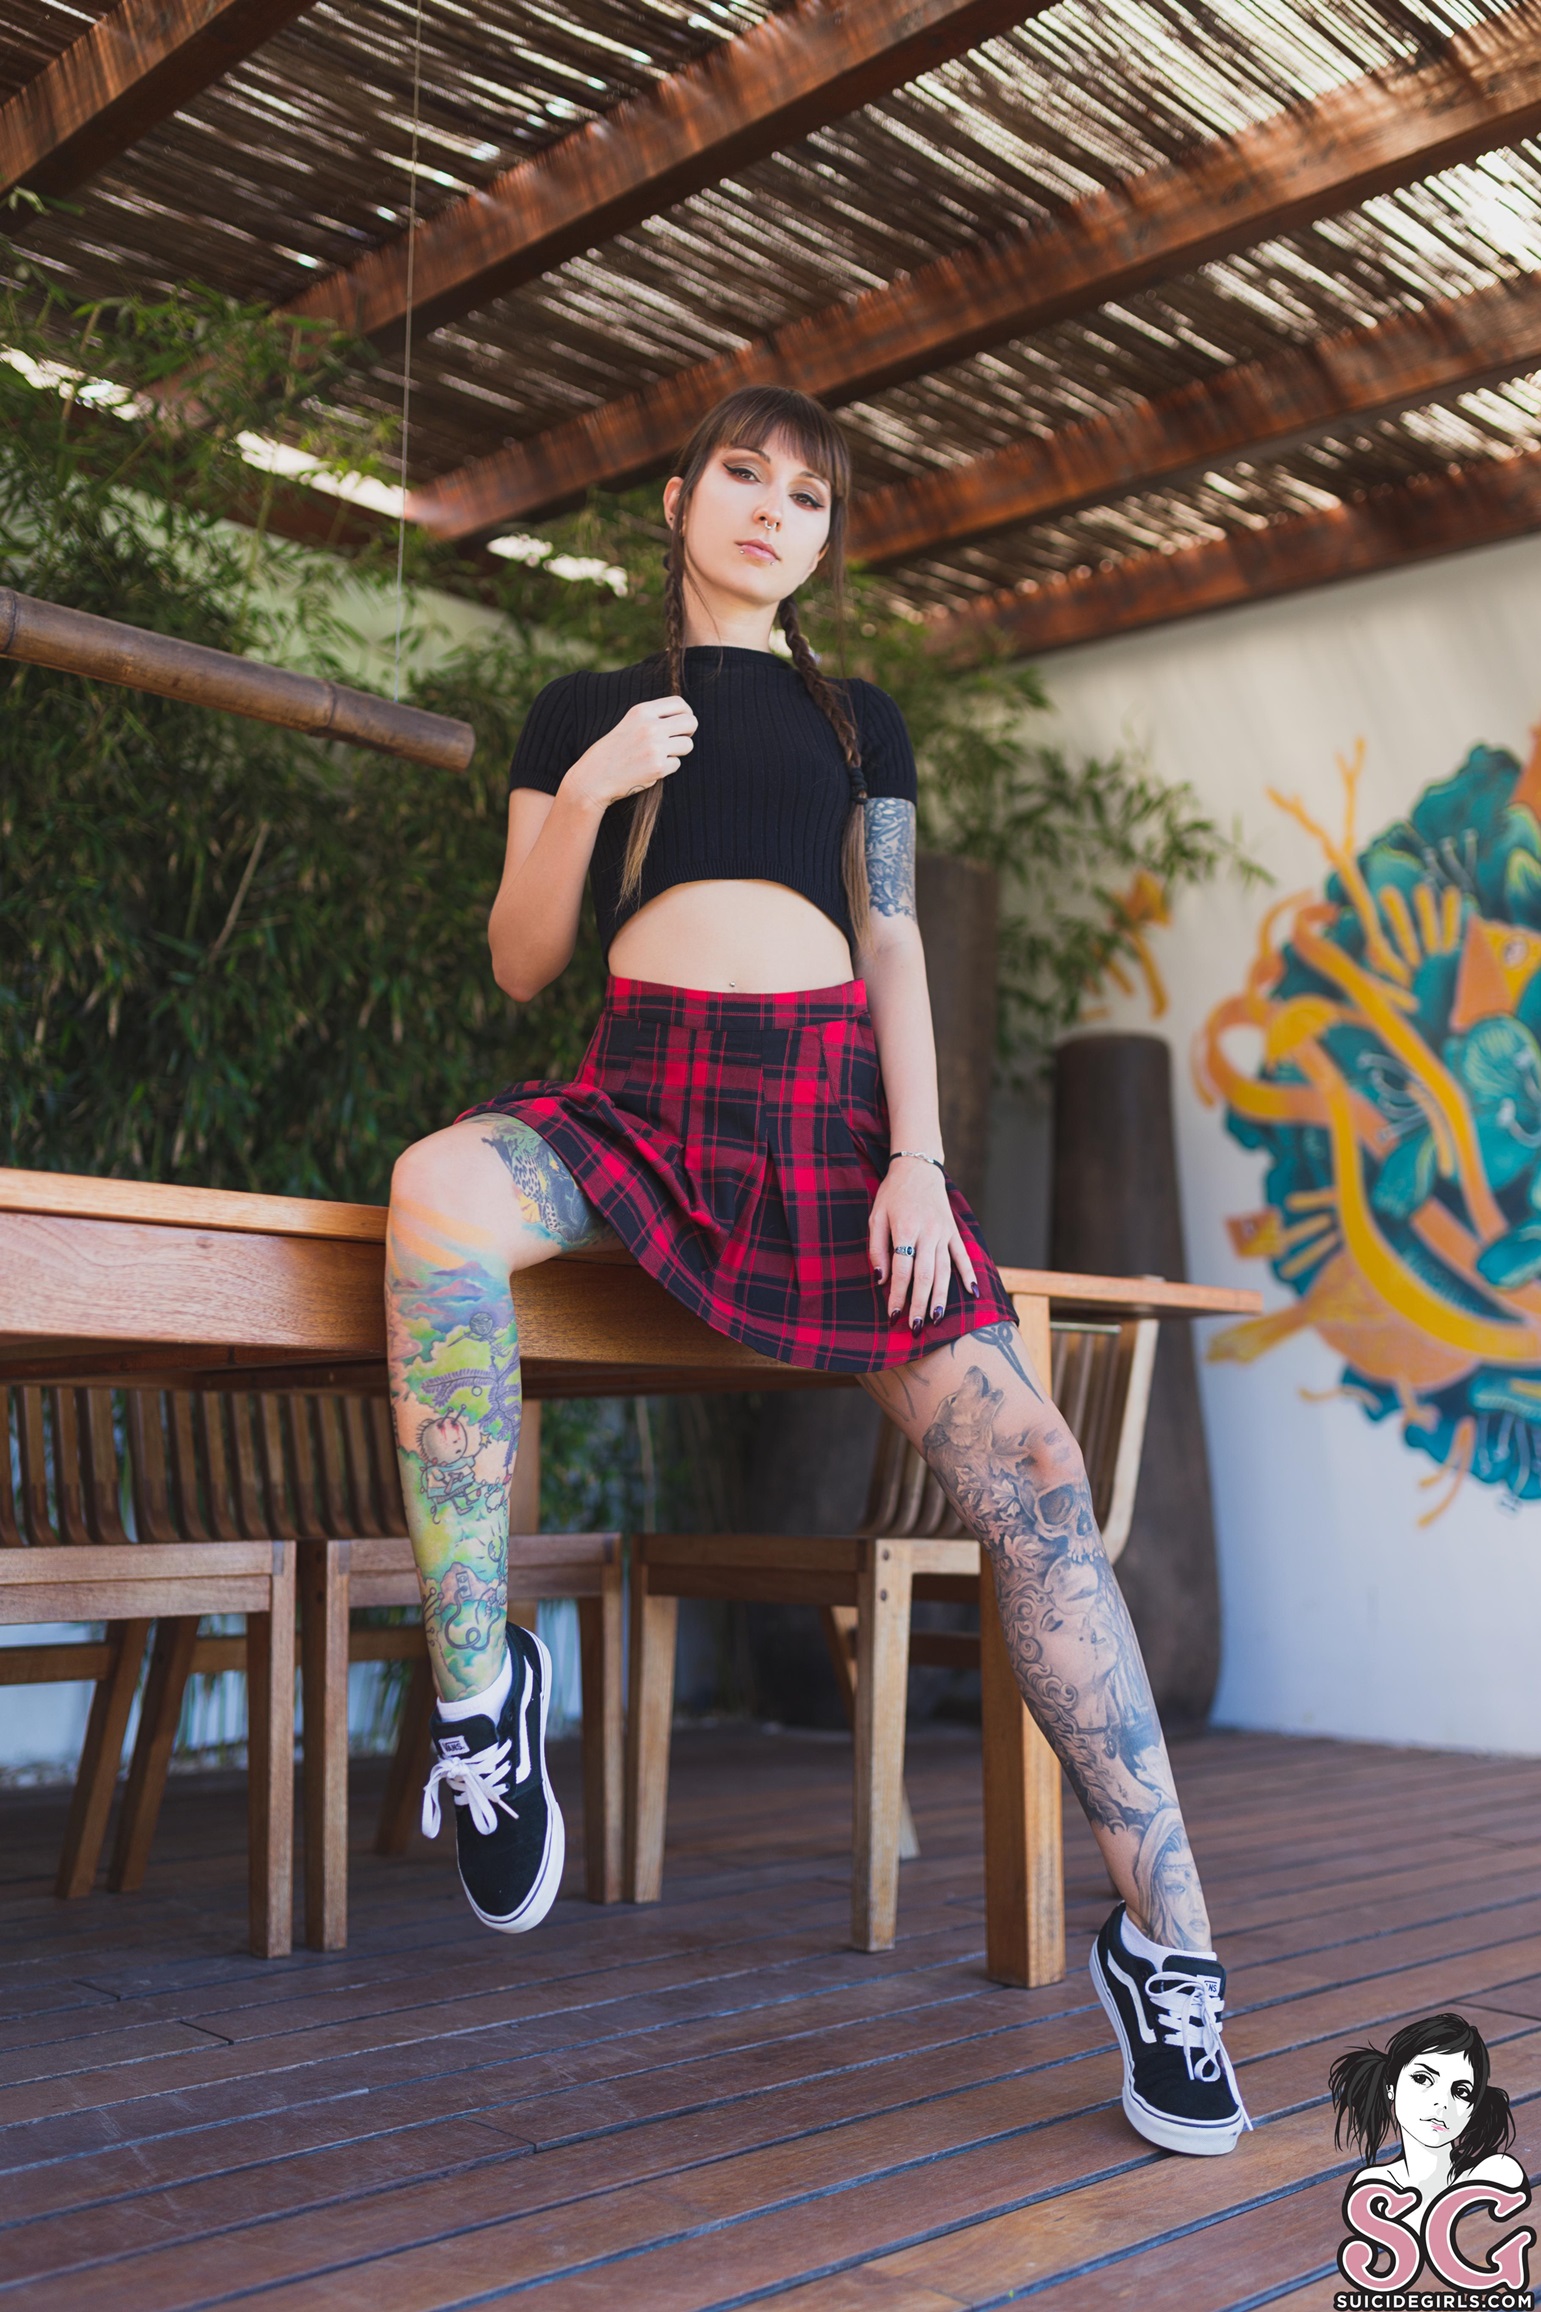 Discordia Suicide Brunette Inked Girls Tattoo Pierced Nose High Waisted 1541x2312